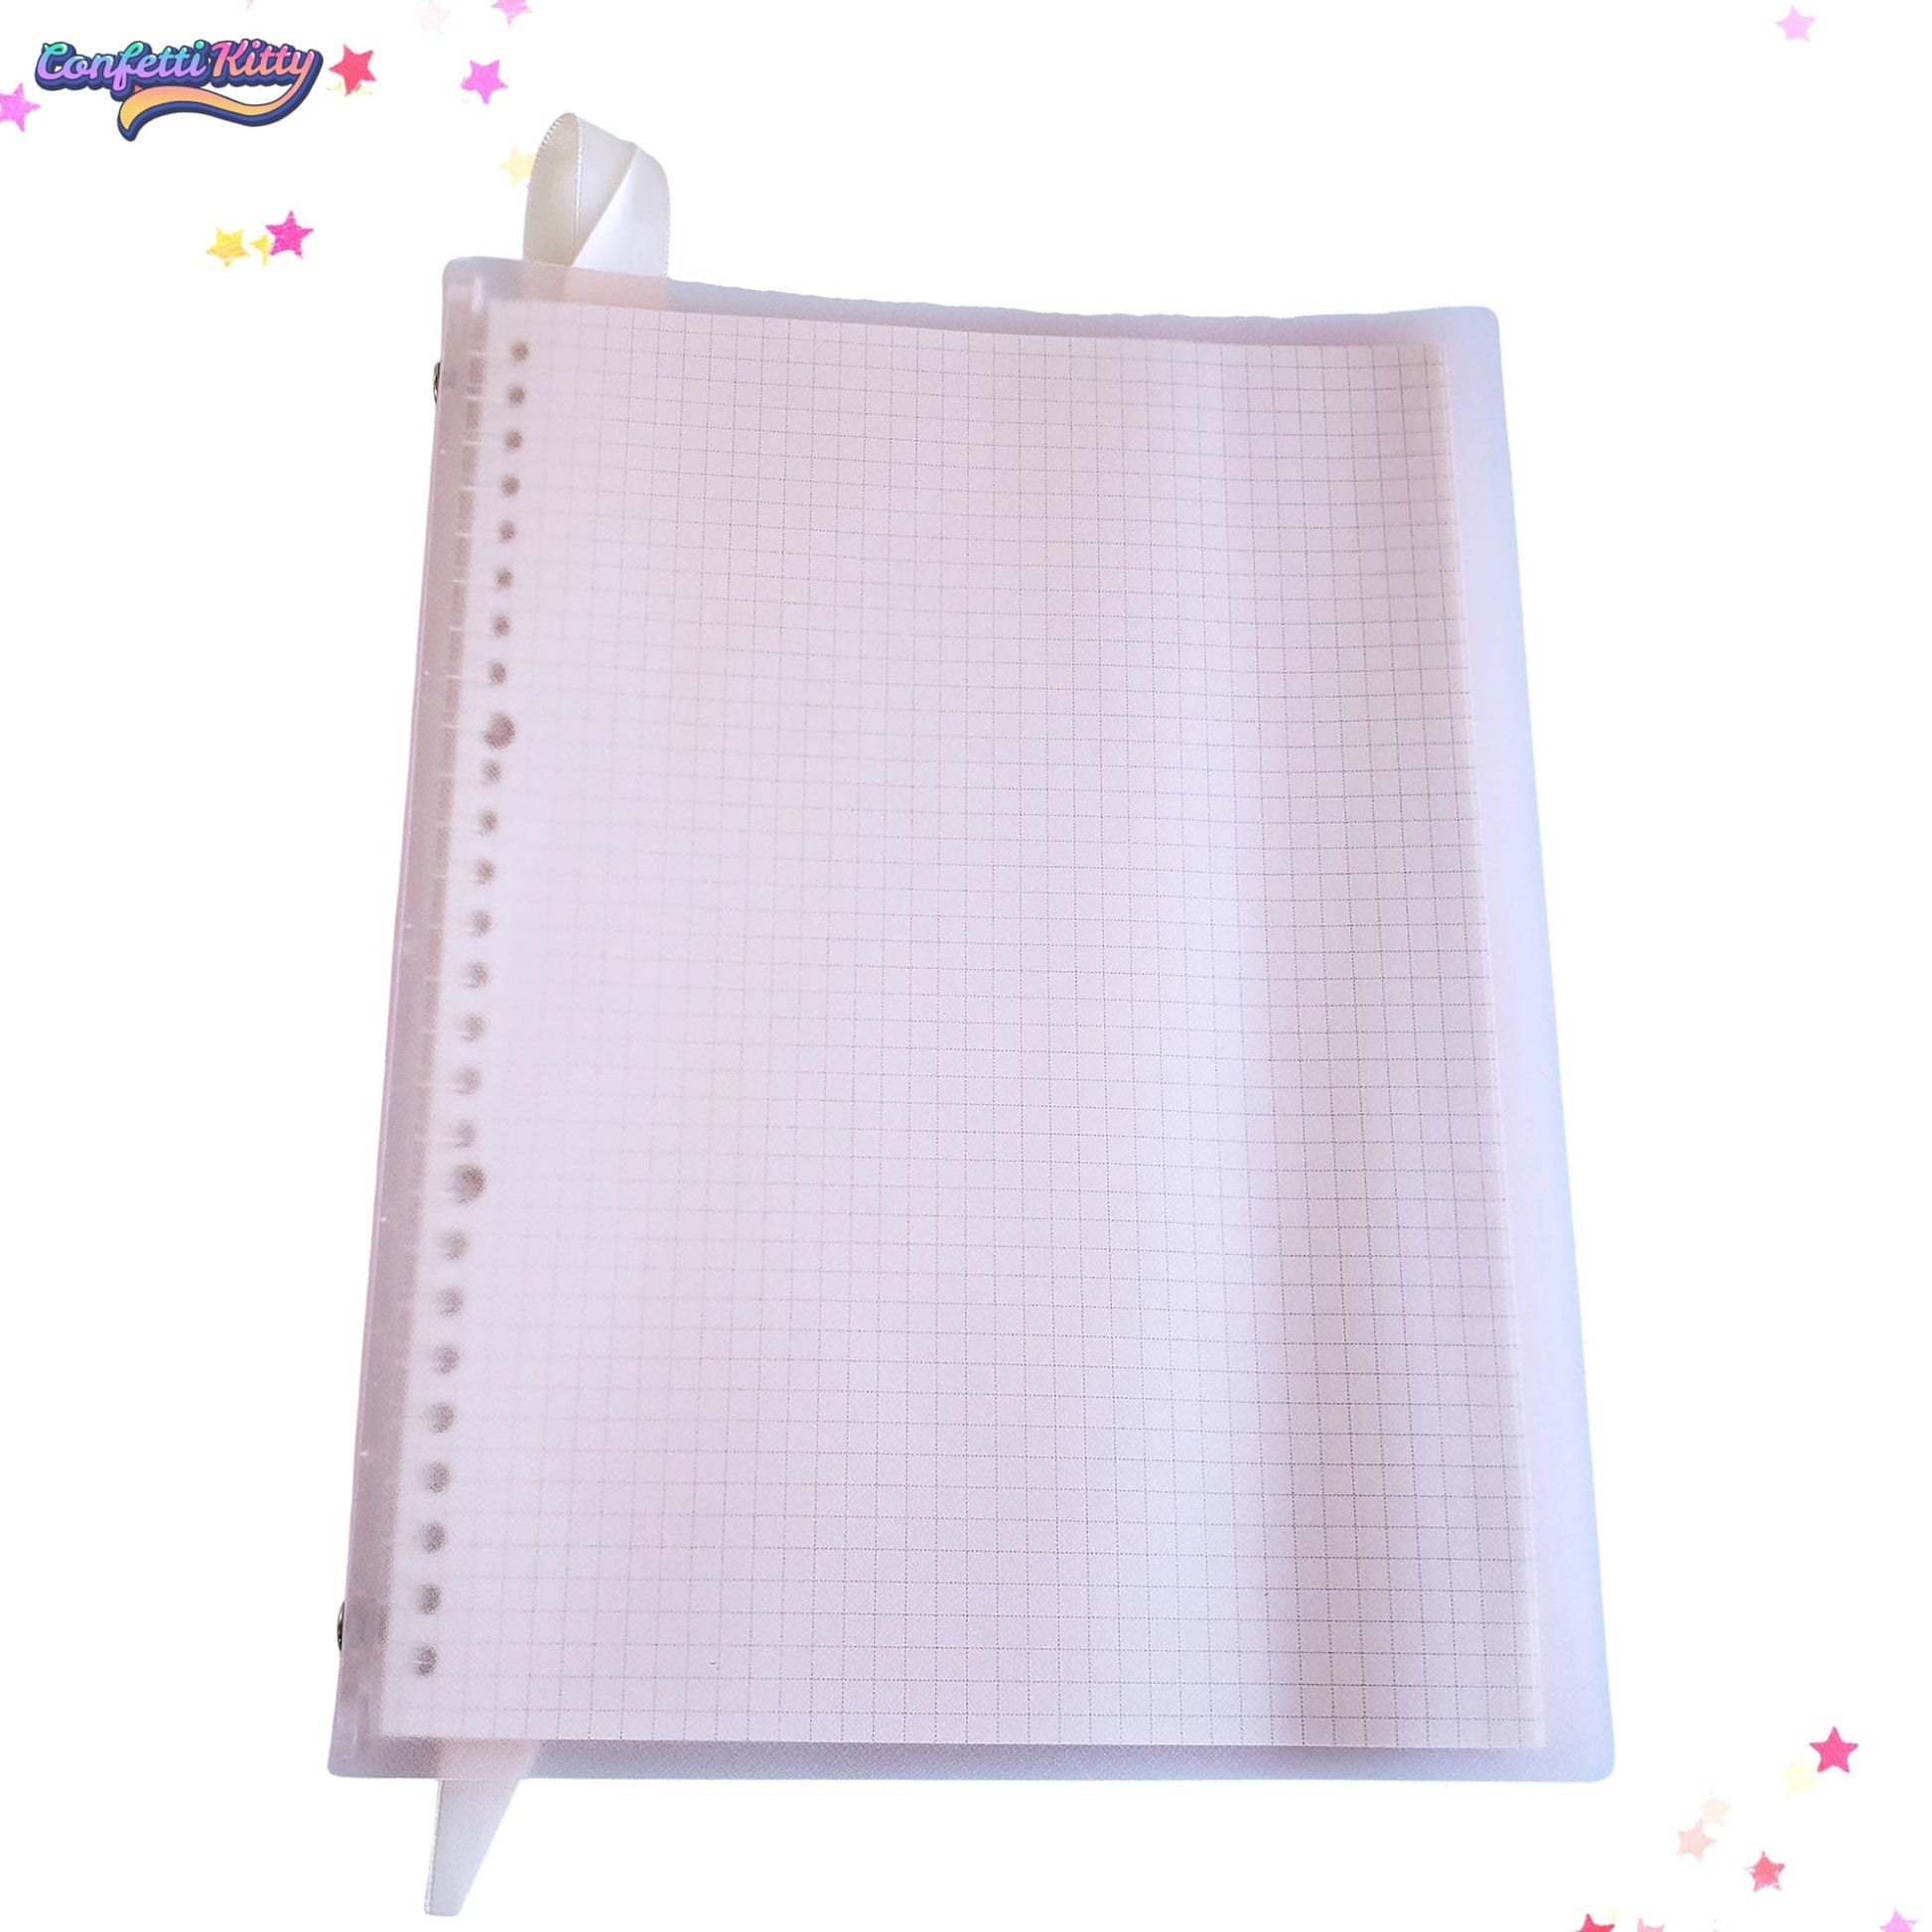 Notebook with Translucent Cover from Confetti Kitty, Only 7.99